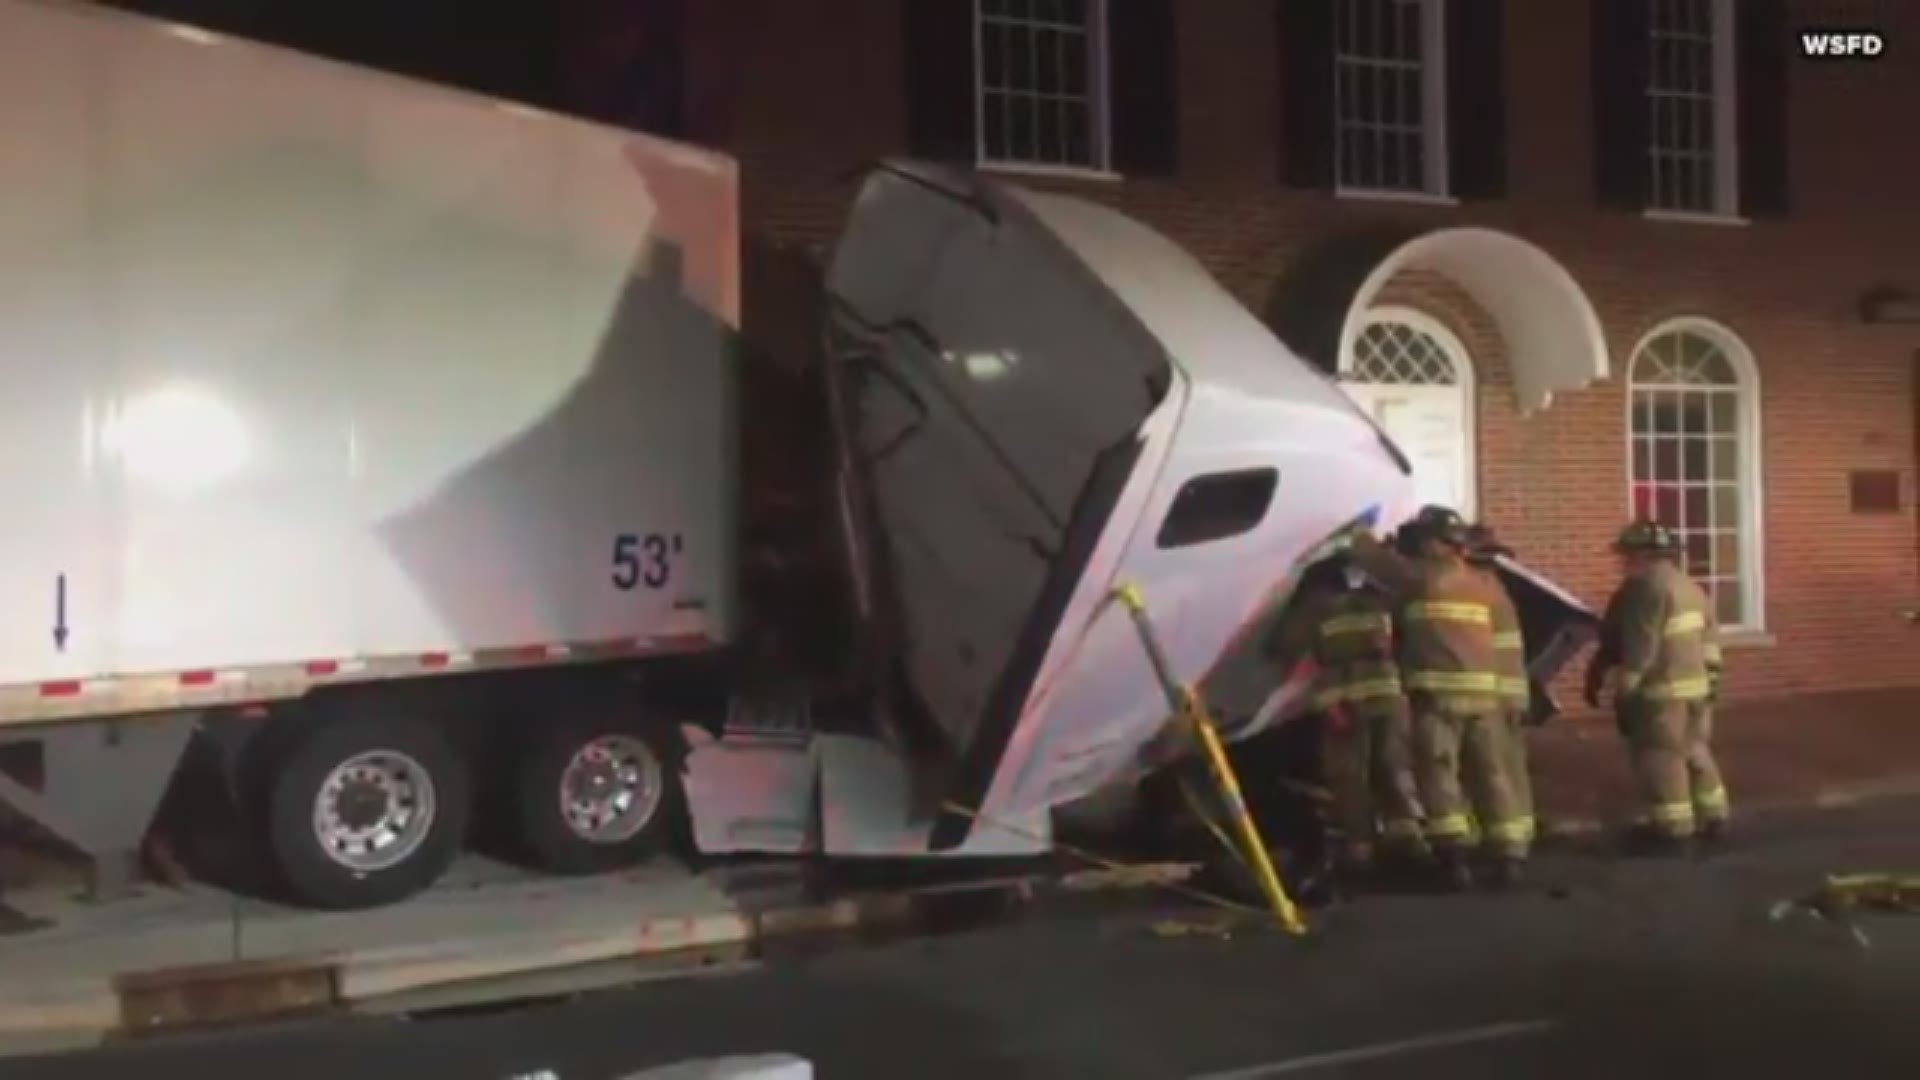 A tractor-trailer has crashed into a building on South Main Street in Winston-Salem.